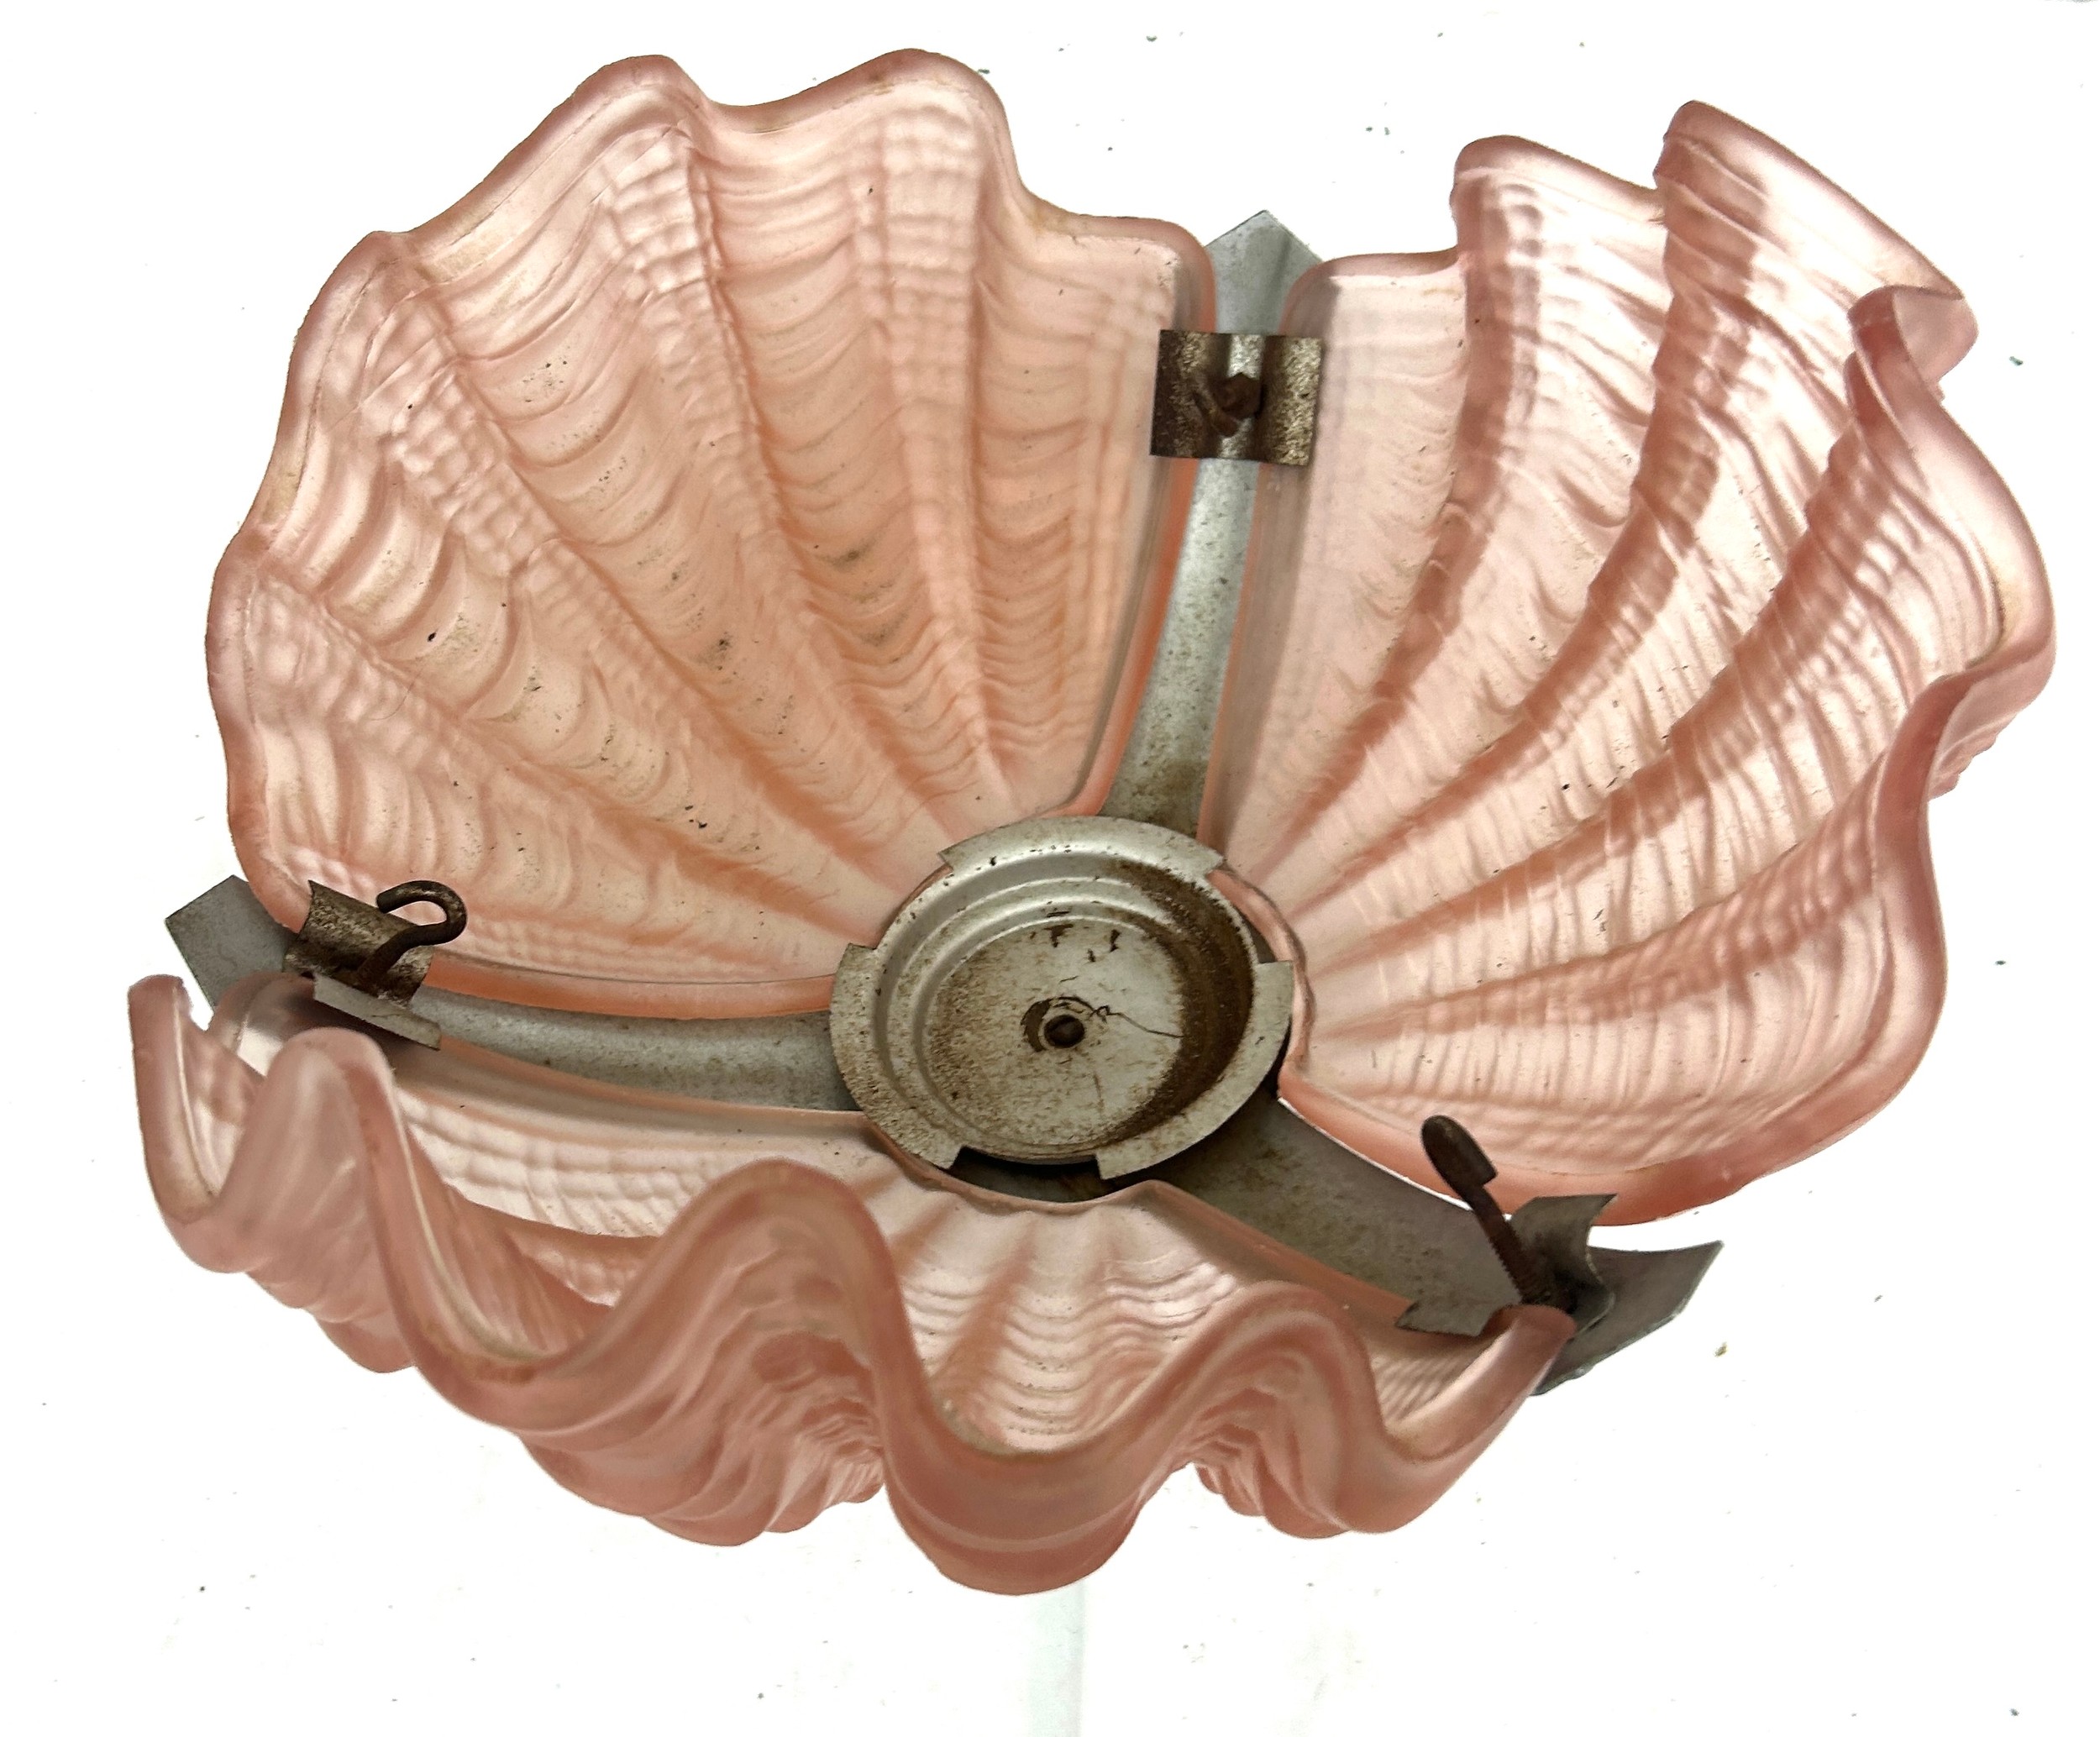 Art deco glass and metal ceiling light measures approx 14 inches diameter by 10 inches tall - Bild 2 aus 3